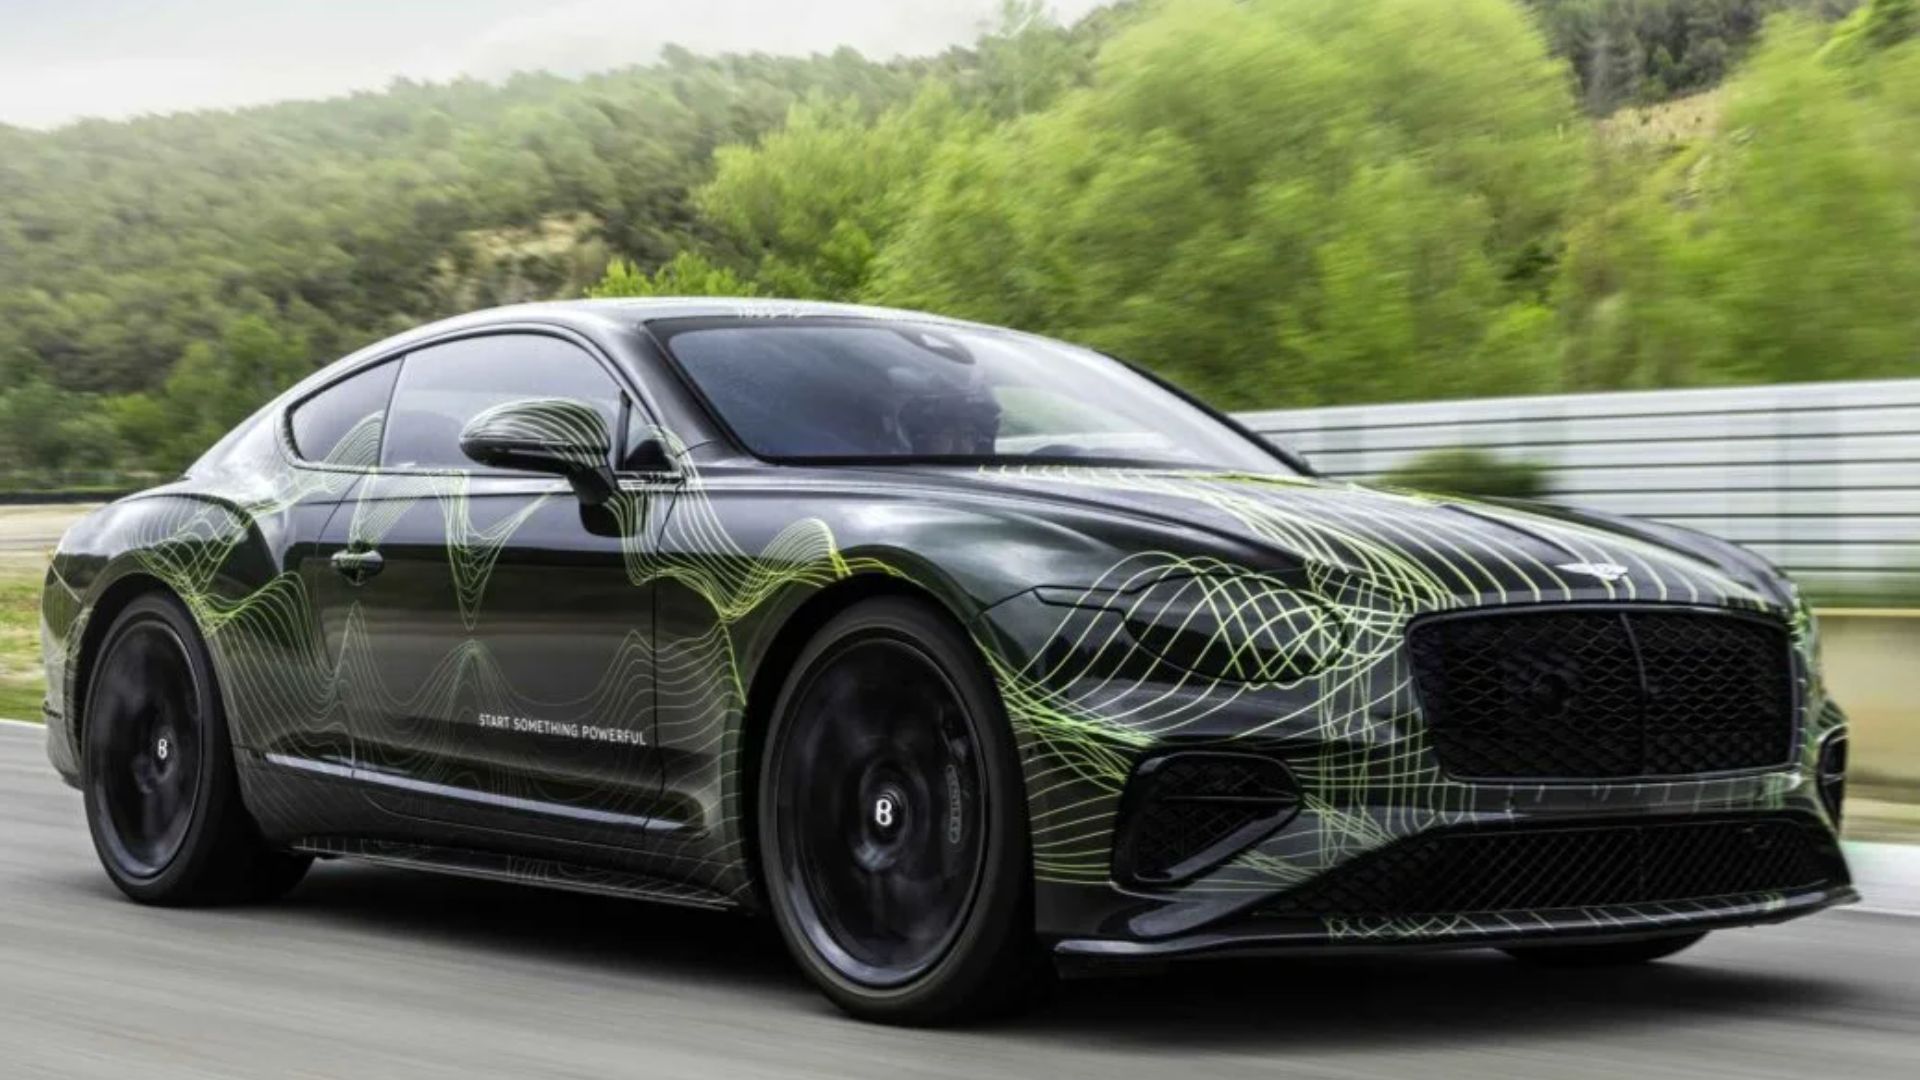 Bentley to Unveil Most Powerful Continental GT Ever in June